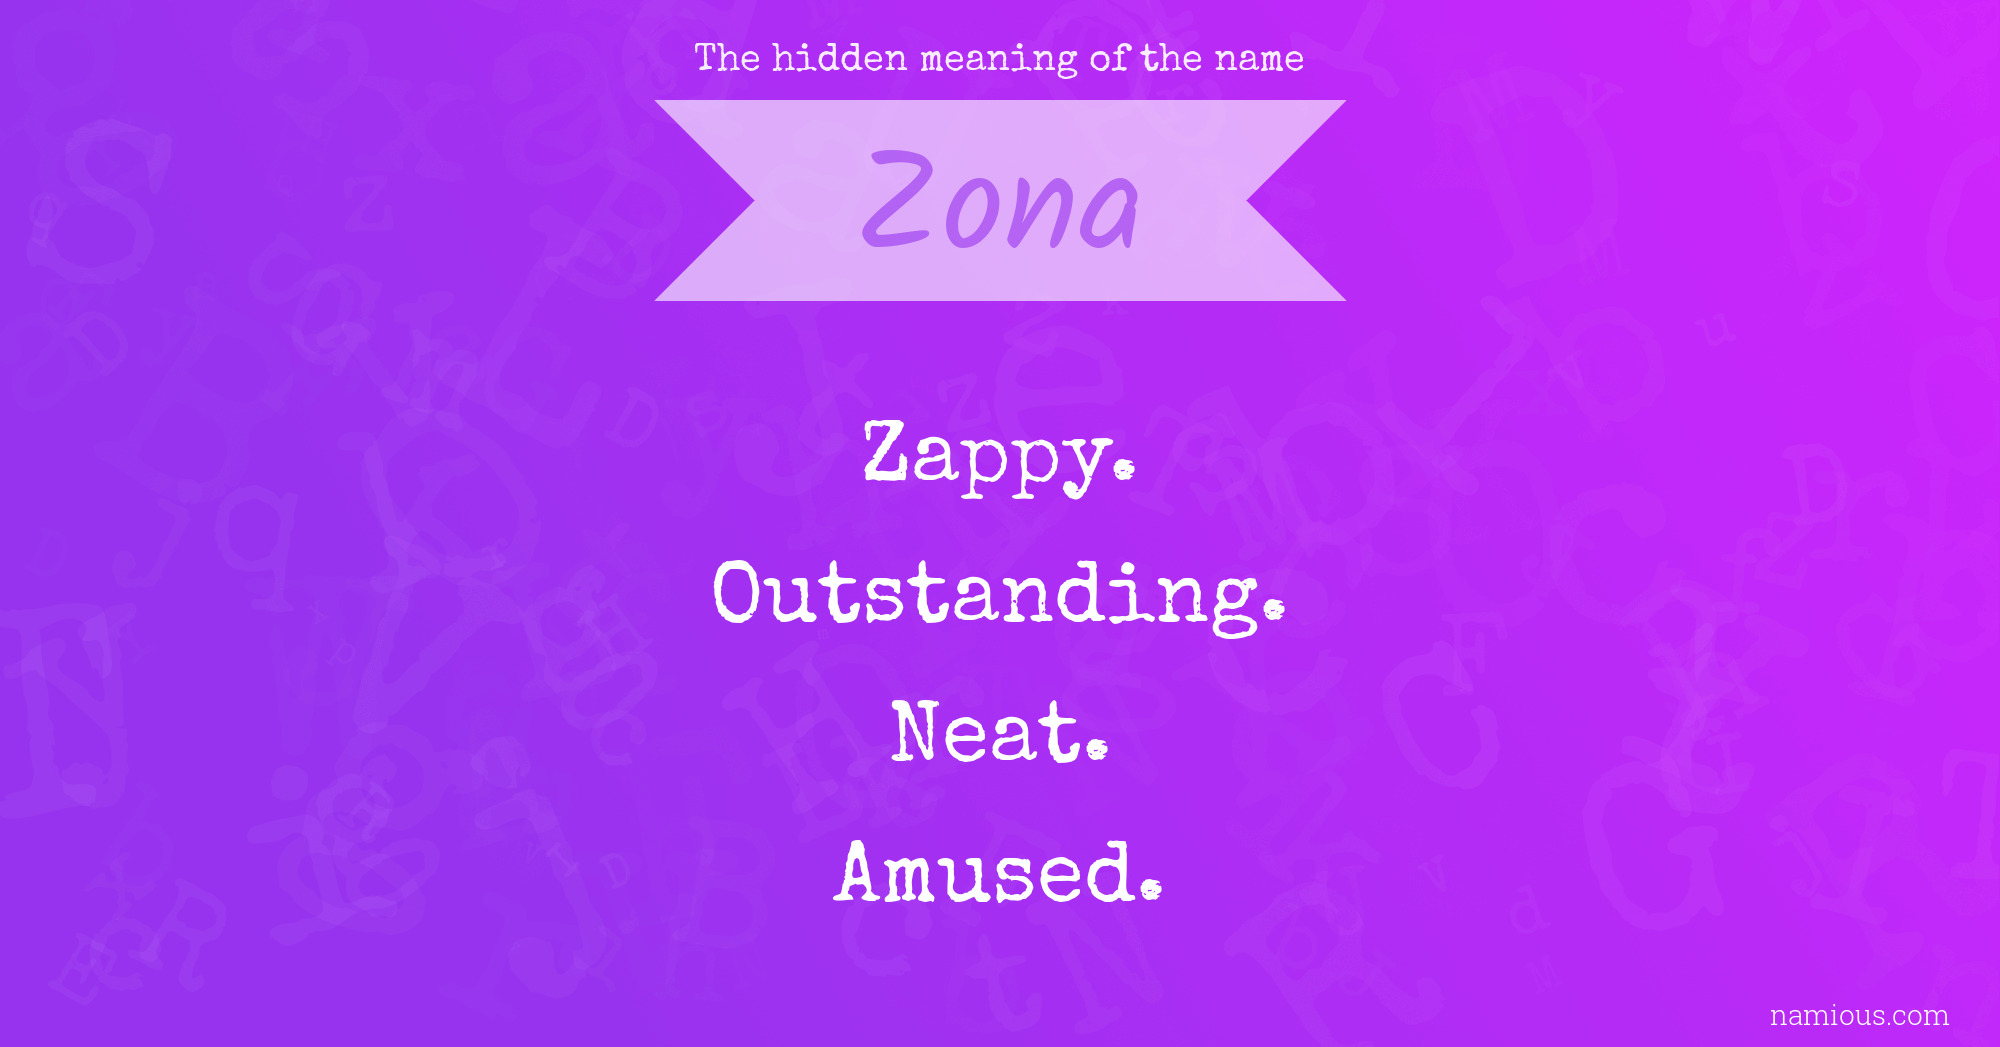 The hidden meaning of the name Zona